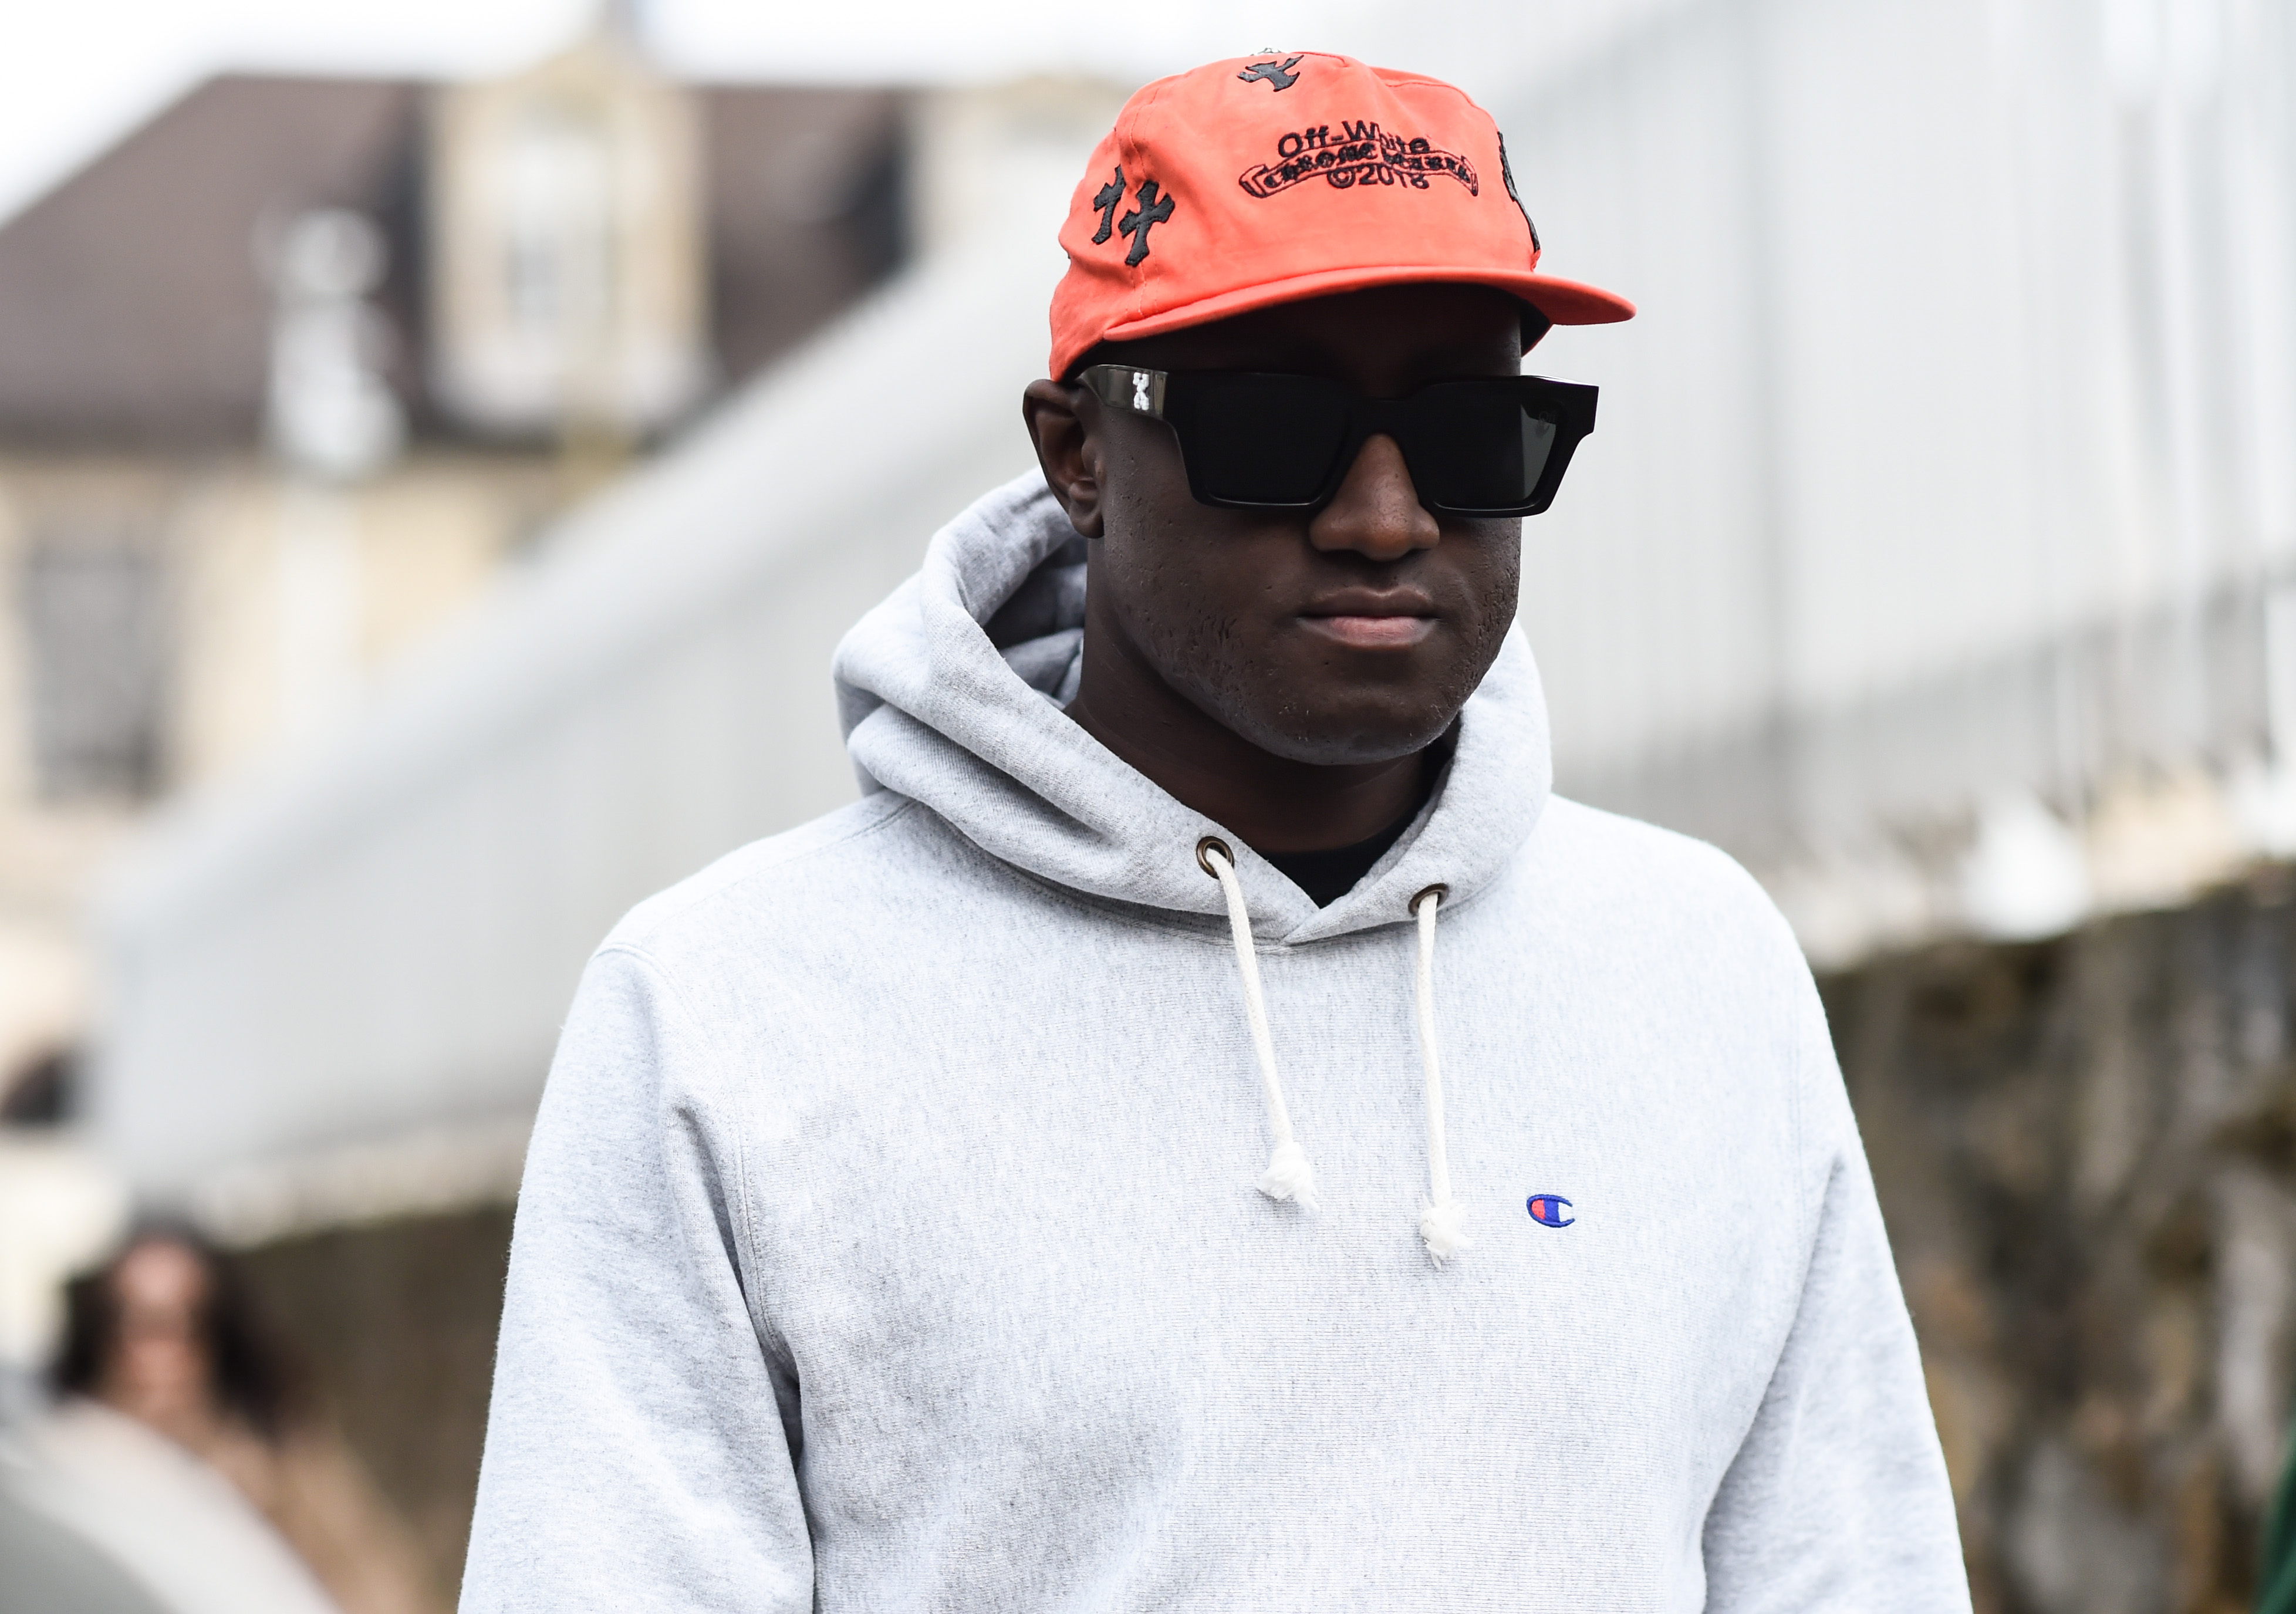 Virgil Abloh launches first sunglasses collection for Off-White